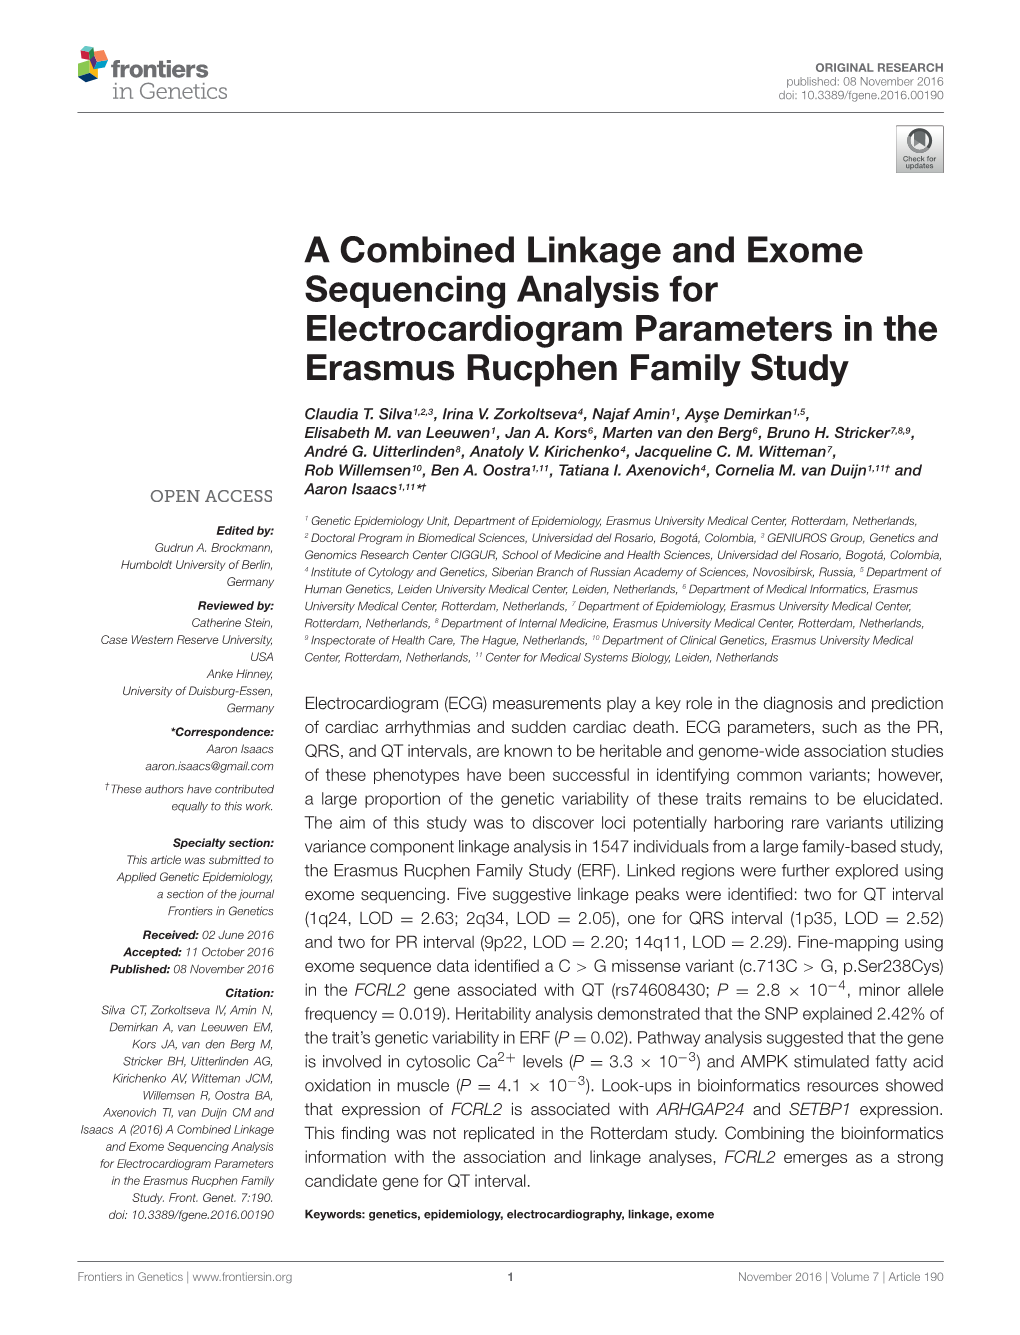 A Combined Linkage and Exome Sequencing Analysis for Electrocardiogram Parameters in the Erasmus Rucphen Family Study